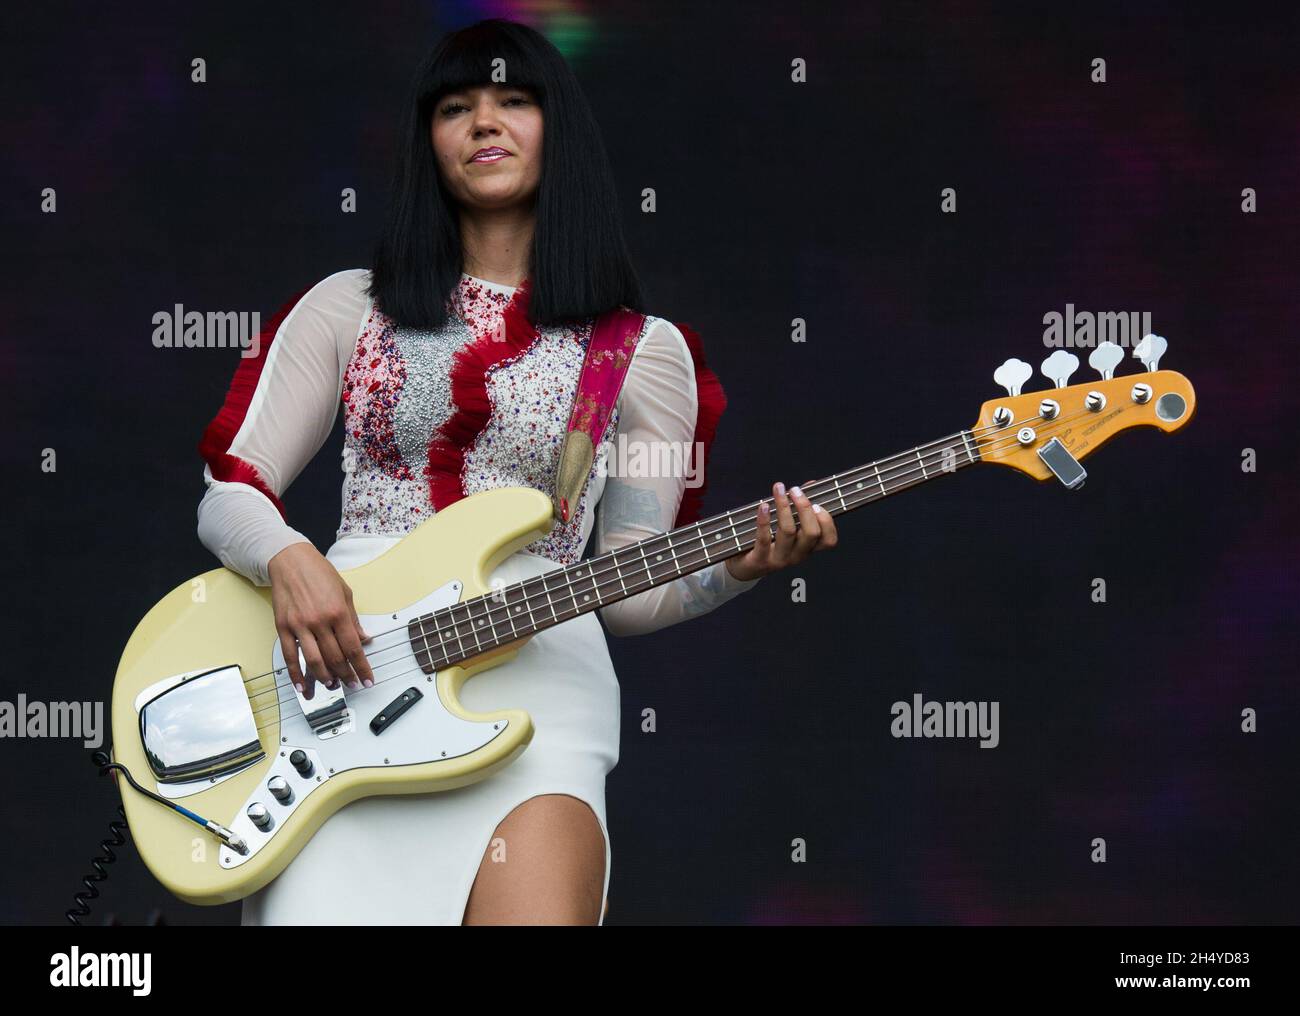 Laura Lee of Khruangbin performs live on stage on day 3 of All Points East festival in Victoria Park on May 27, 2018 in London, England. Picture date: Sunday 27 May, 2018. Photo credit: Katja Ogrin/ EMPICS Entertainment. Stock Photo